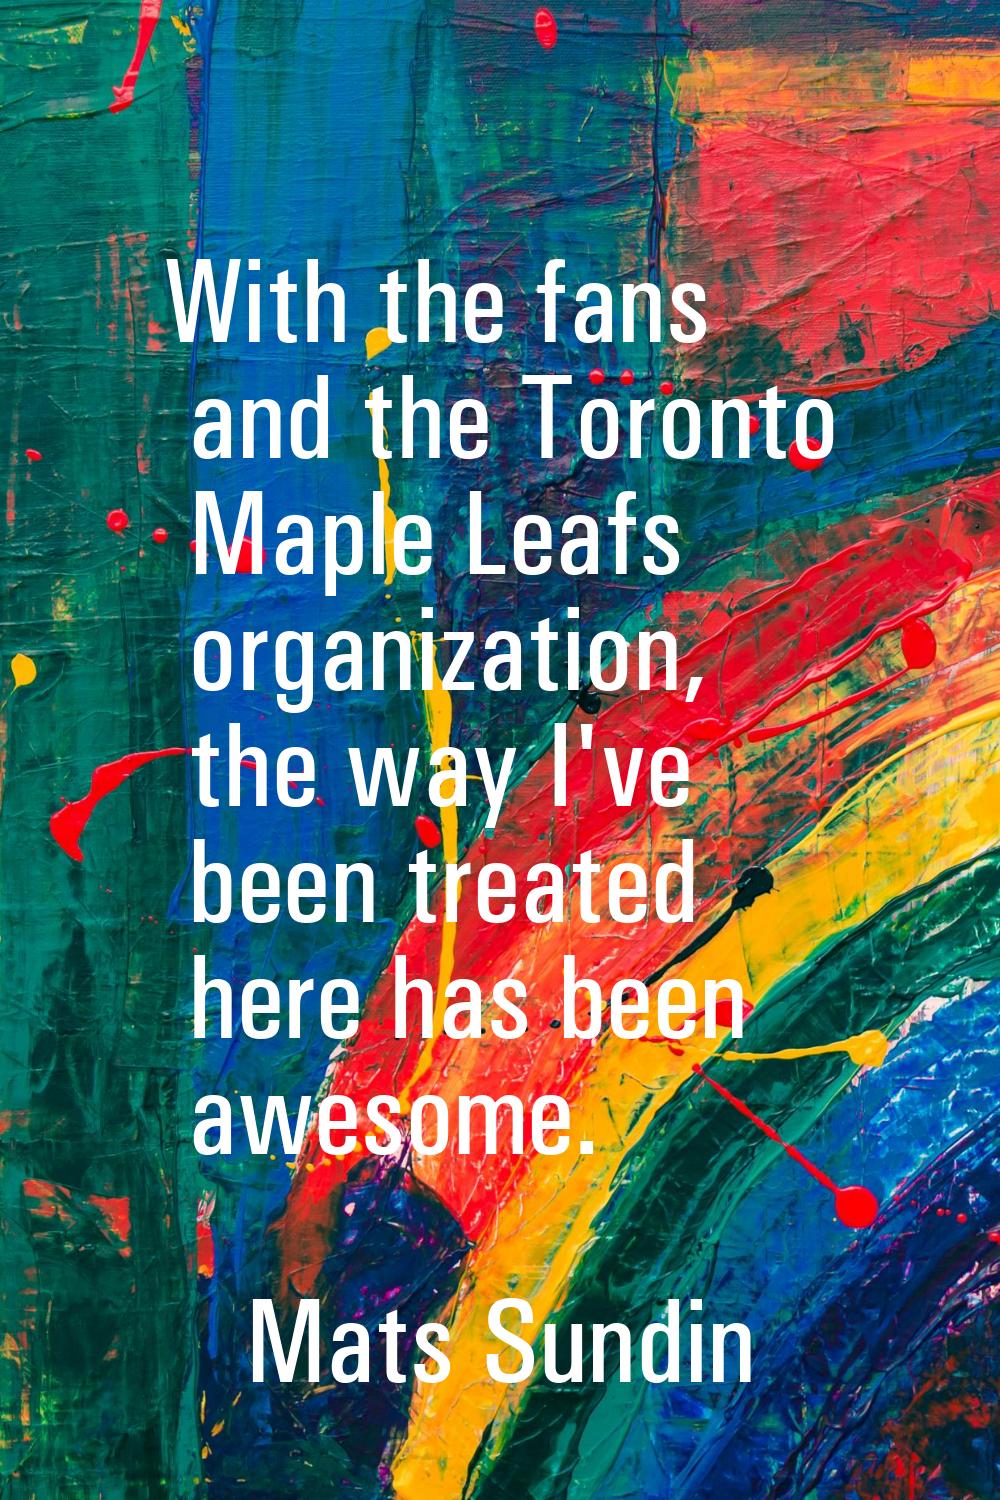 With the fans and the Toronto Maple Leafs organization, the way I've been treated here has been awe